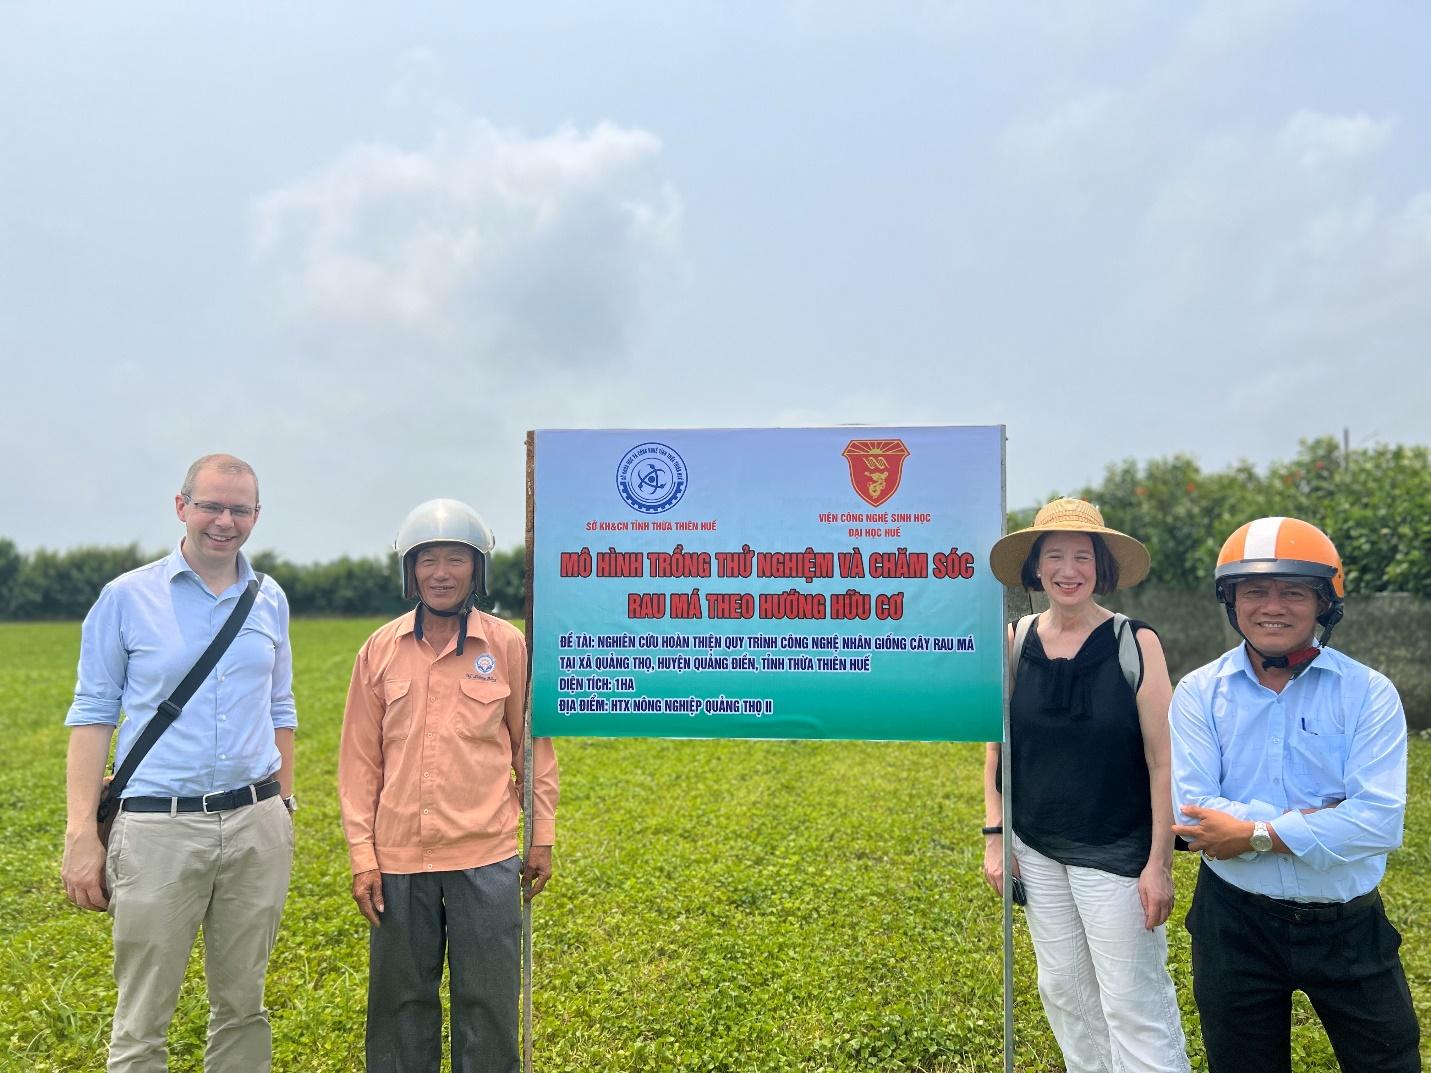 A group of people standing in a field holding a sign Description automatically generated